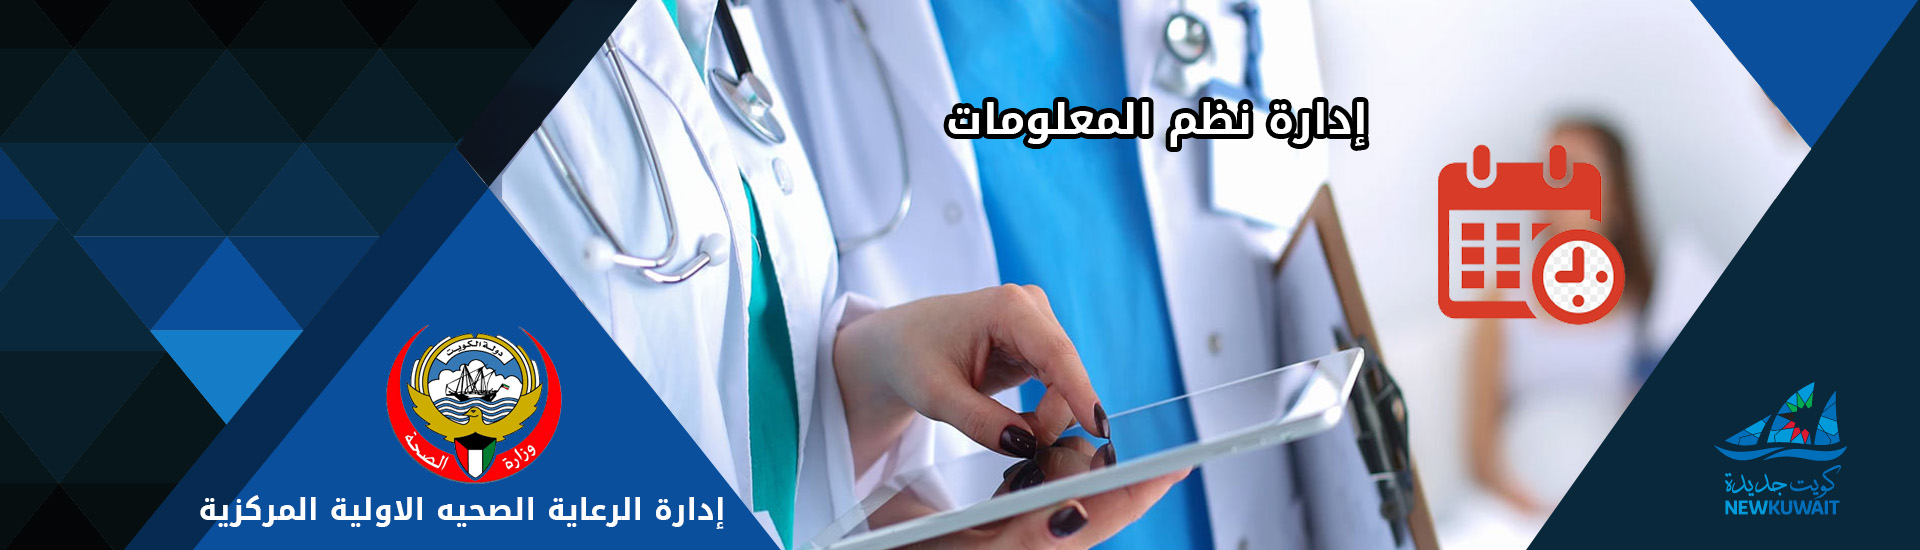 Booking an appointment for winter vaccinations in Q8, iiQ8 online register 2